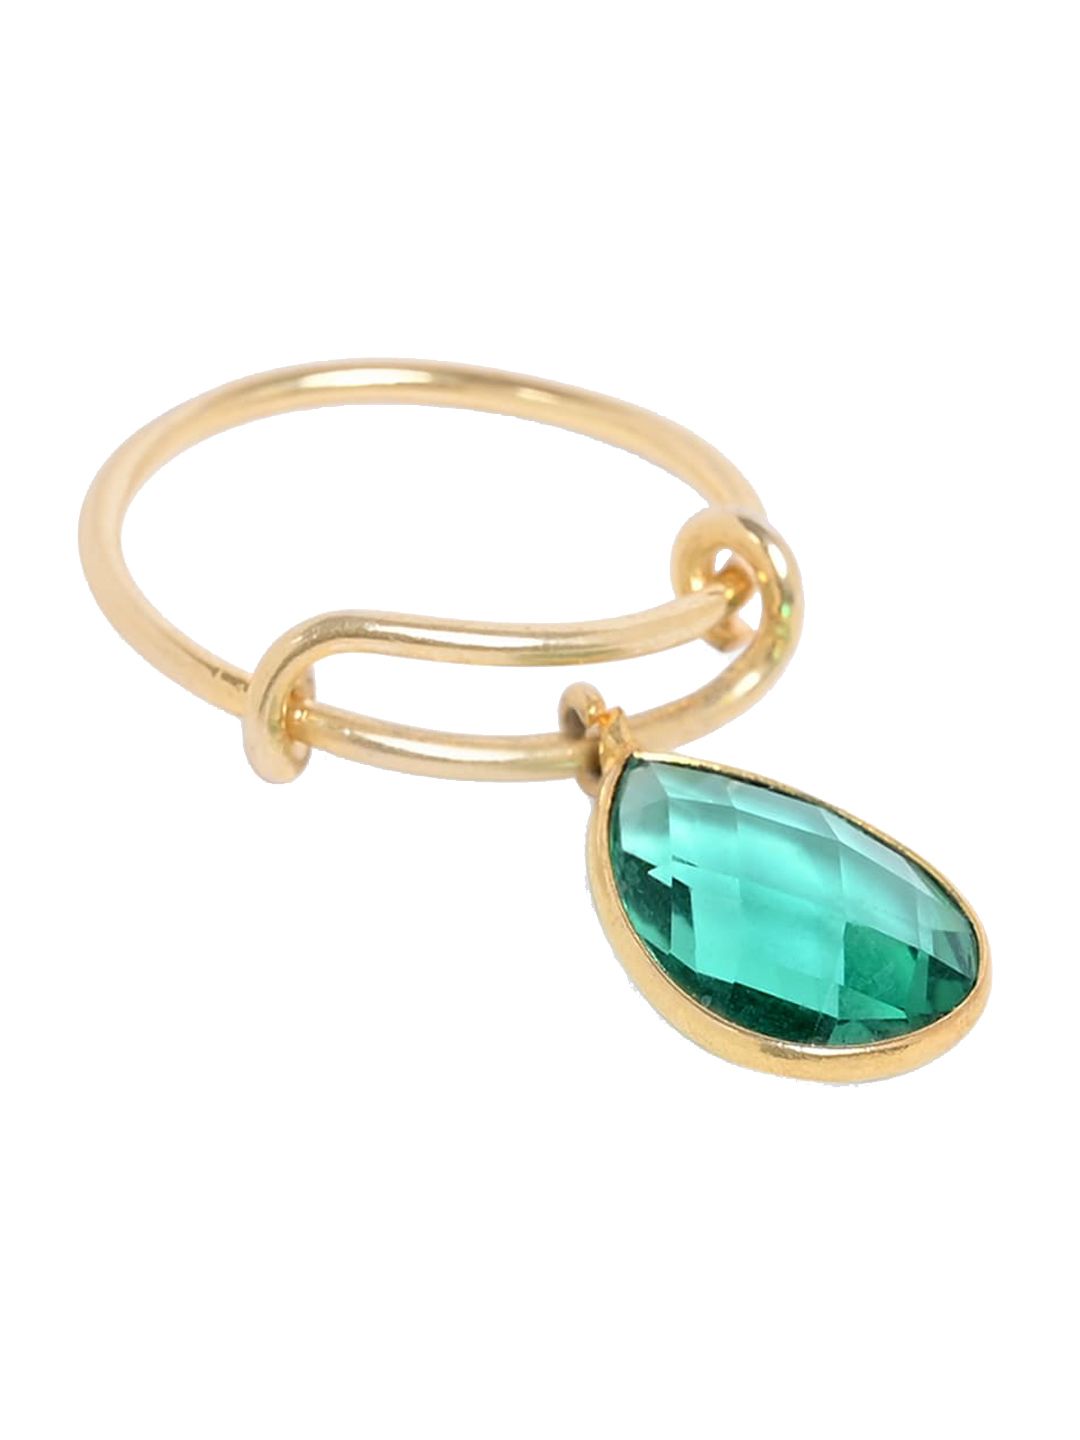 Mikoto by FableStreet Gold-Plated Green Quartz-Studded Adjustable Finger Ring Price in India